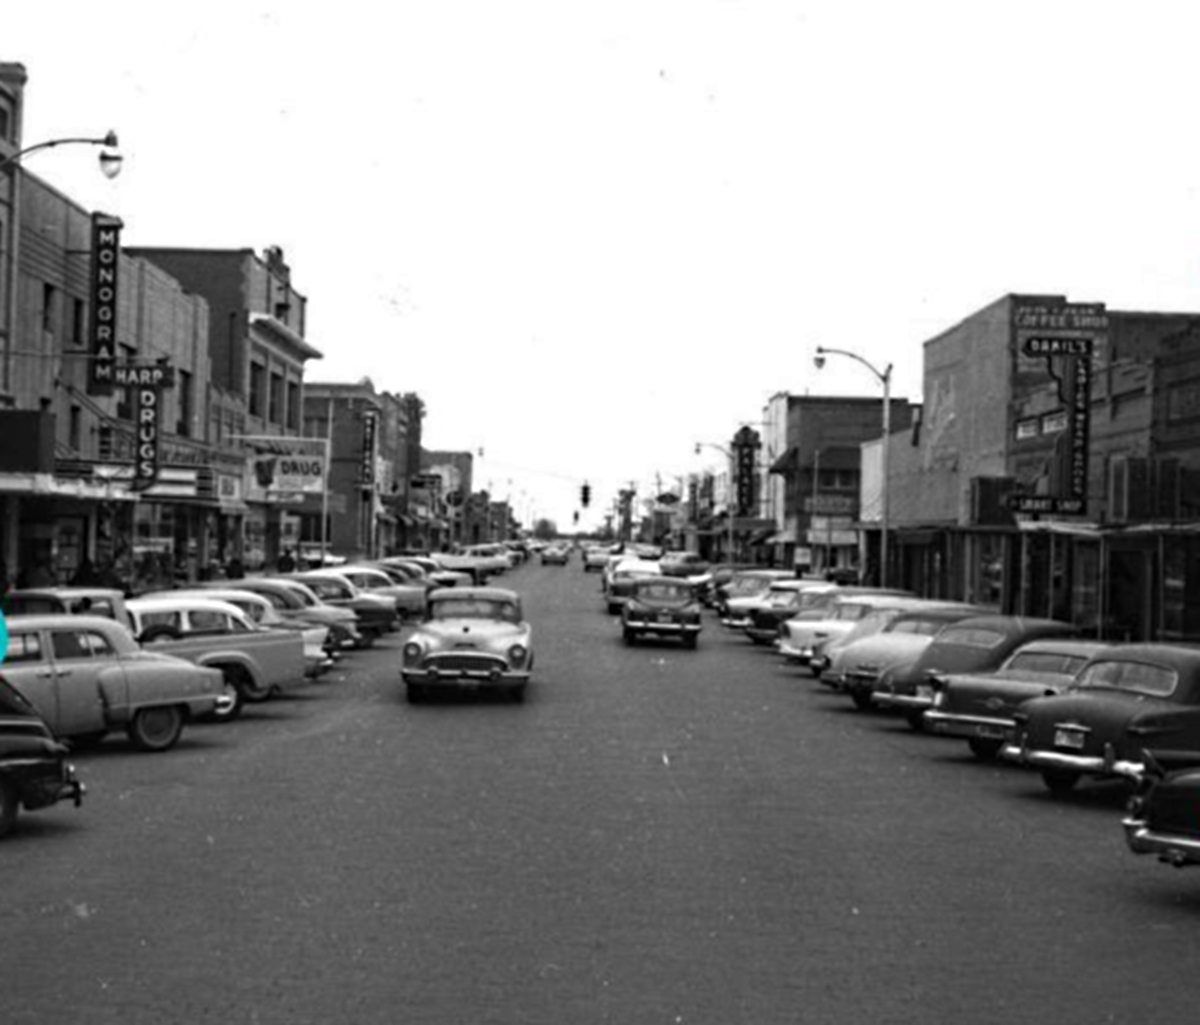 Downtown Childress in 1950s